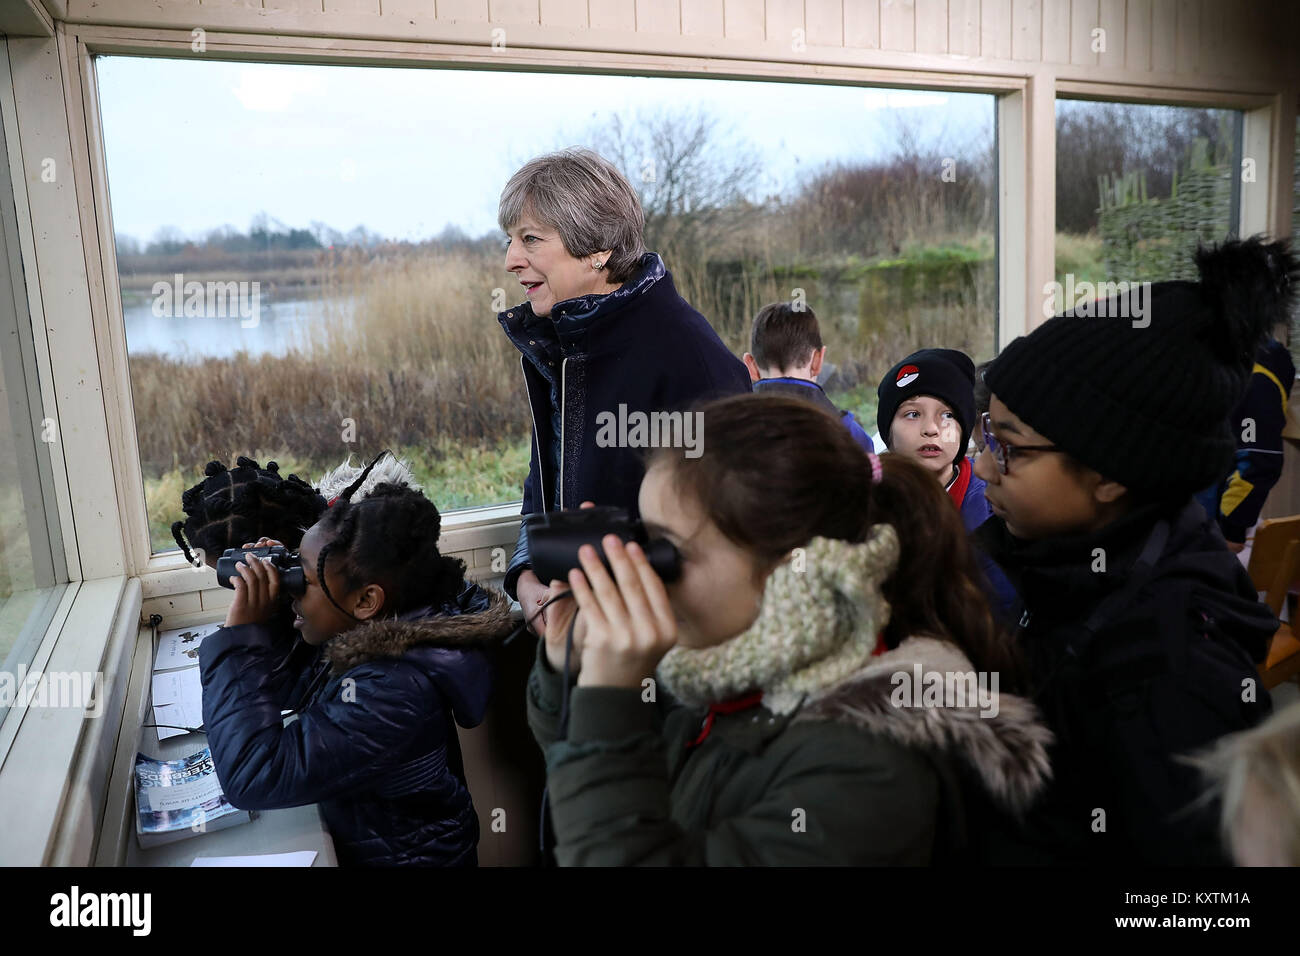 Prime Minister Theresa May stands with school children inside a bird hide at the London Wetland Centre in South West London, where she set out her vision for protecting the environment. Stock Photo